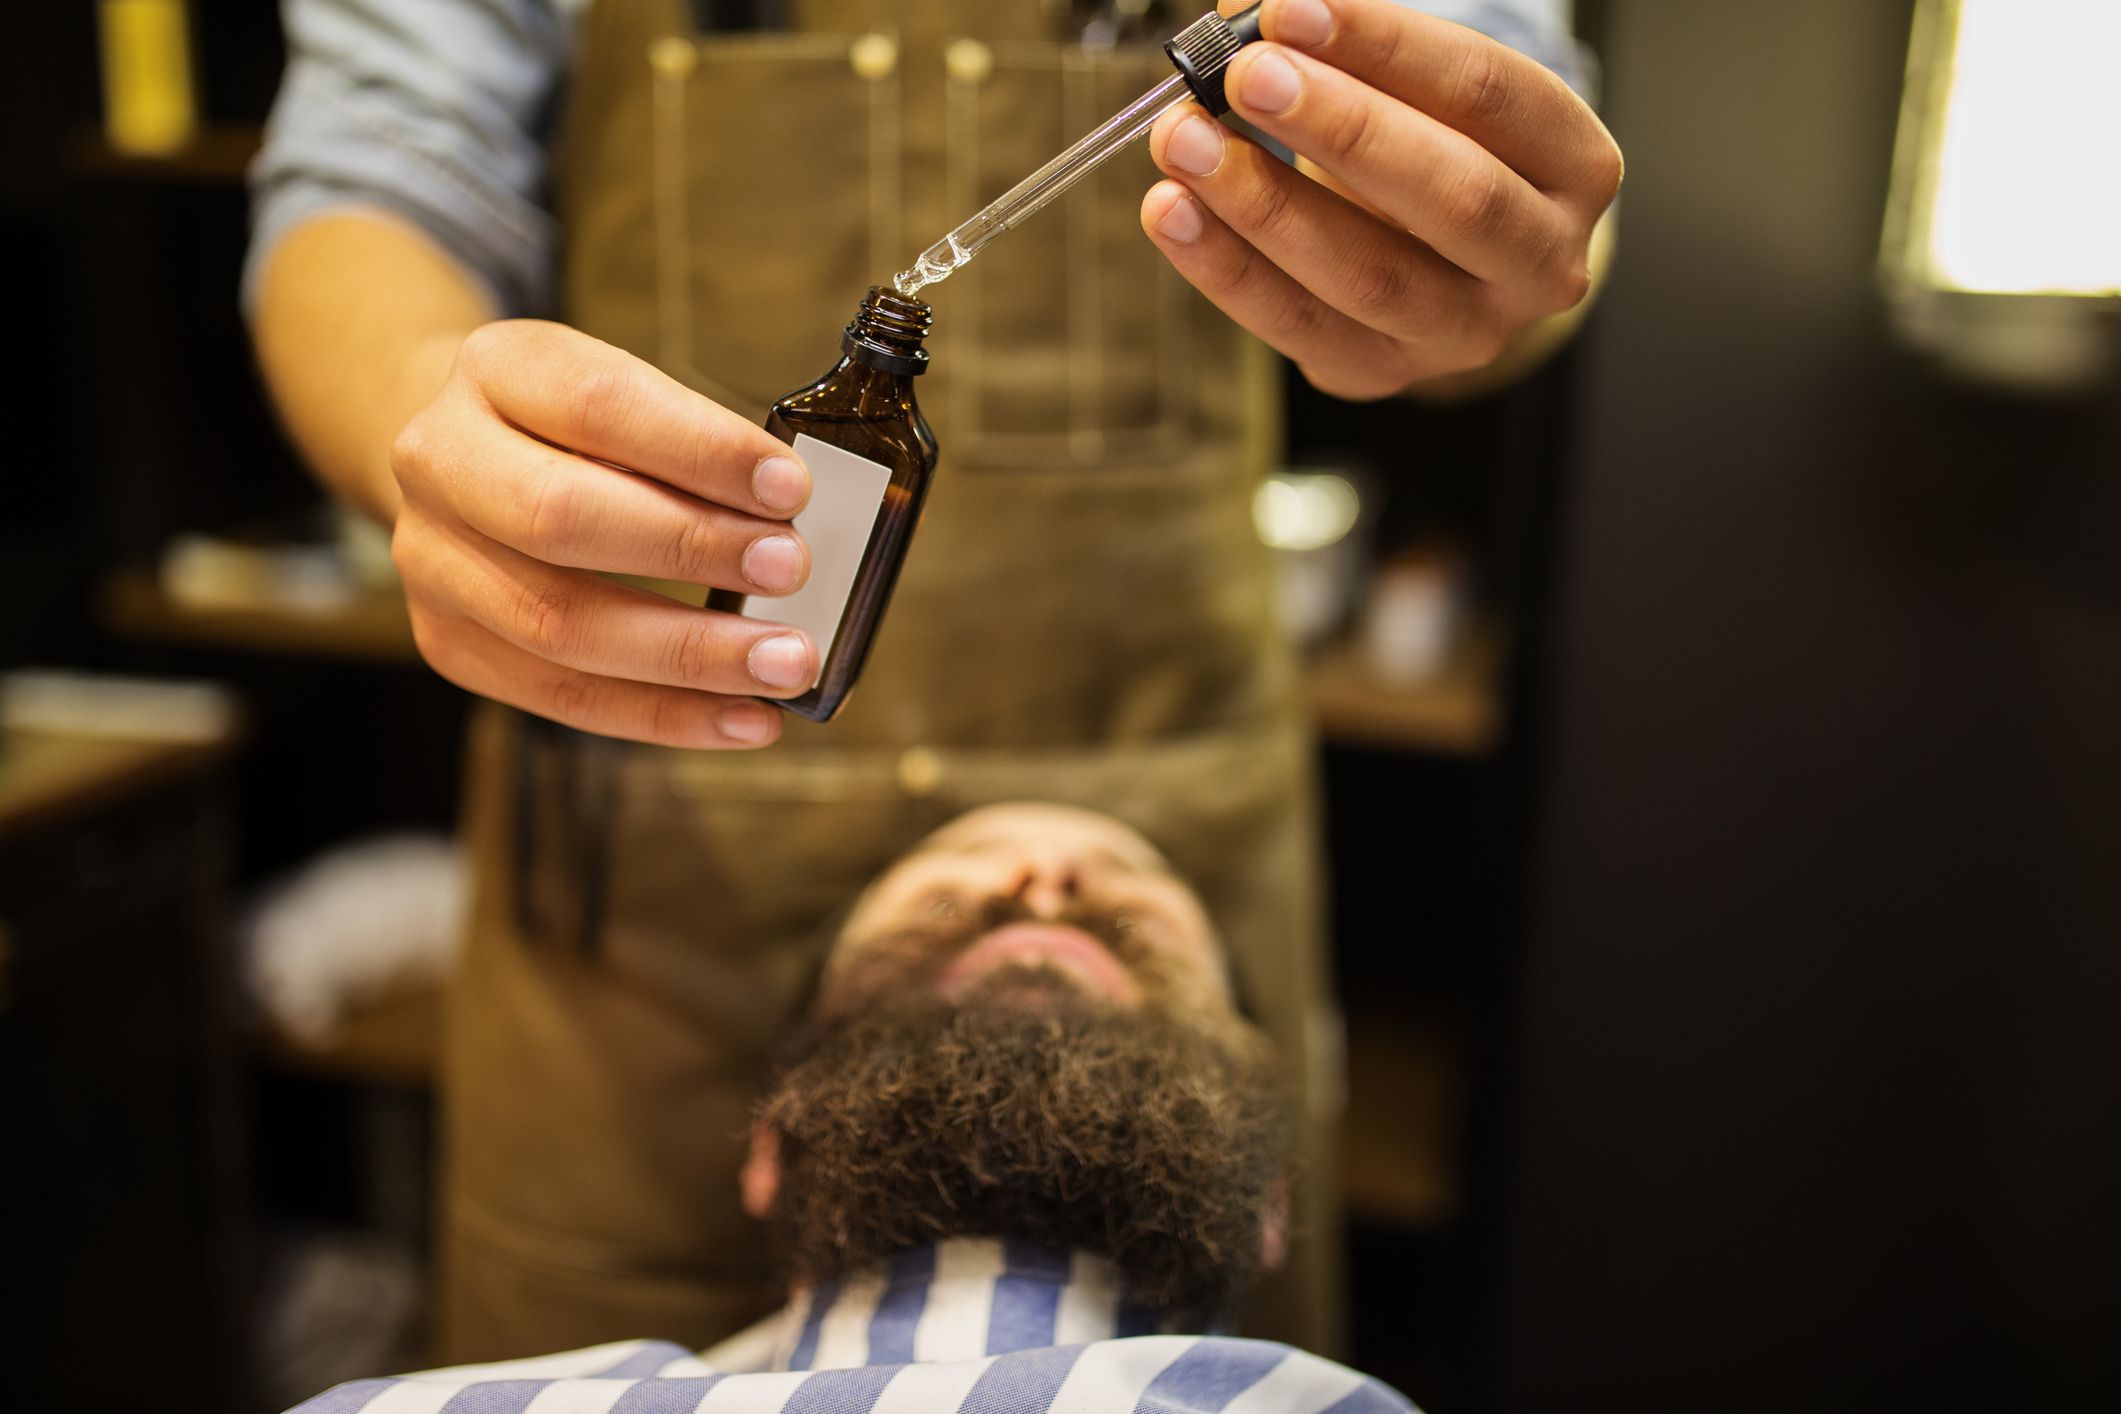 14 Best Beard Oils: A complete guide to beard oil products and its uses